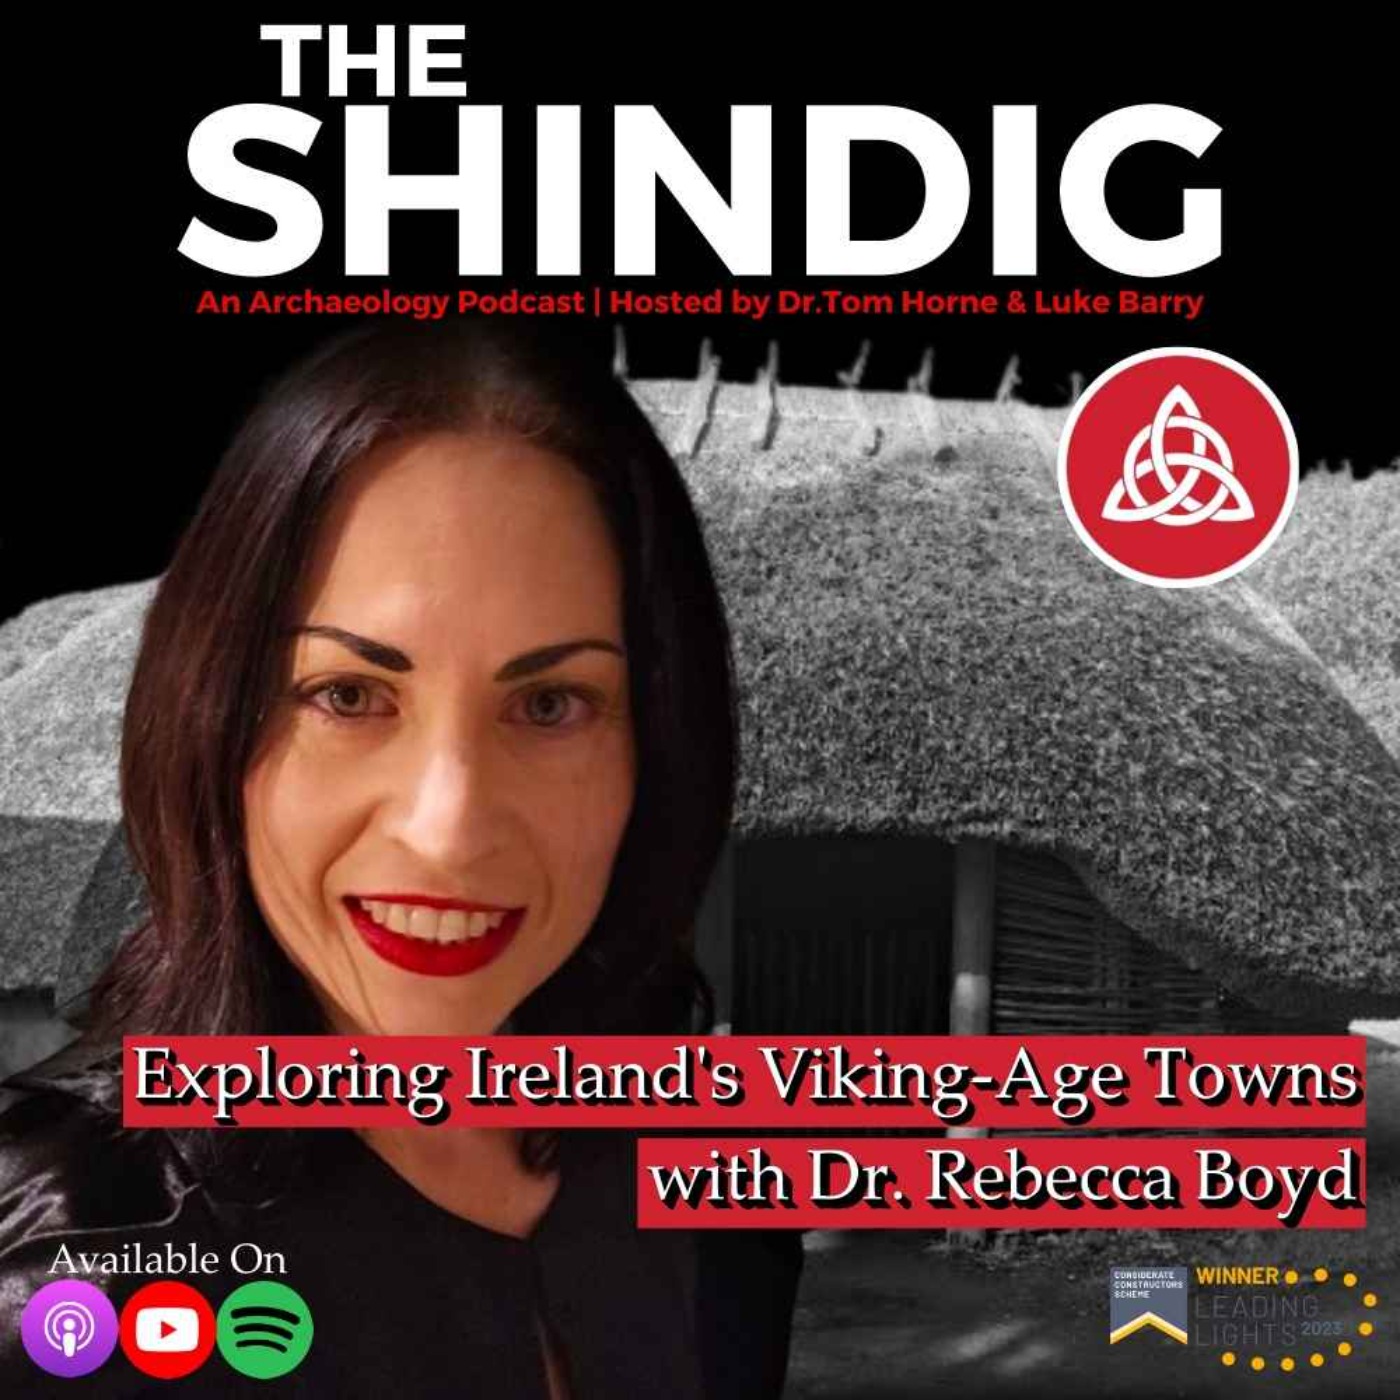 Exploring Ireland’s Viking-Age Towns, with Dr. Rebecca Boyd